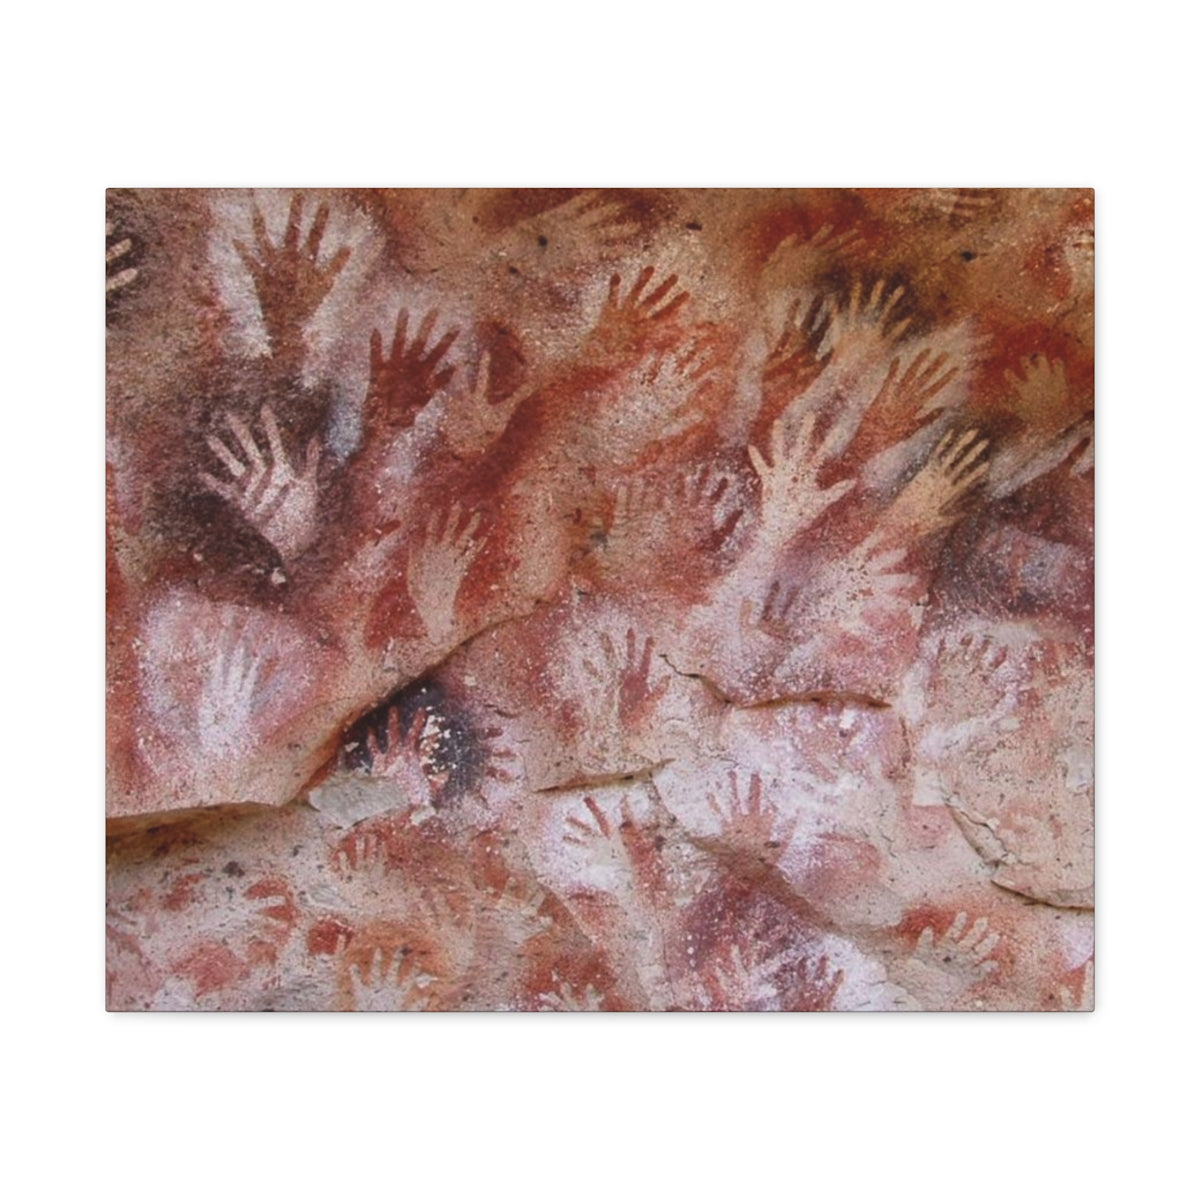 Cave of the Hands